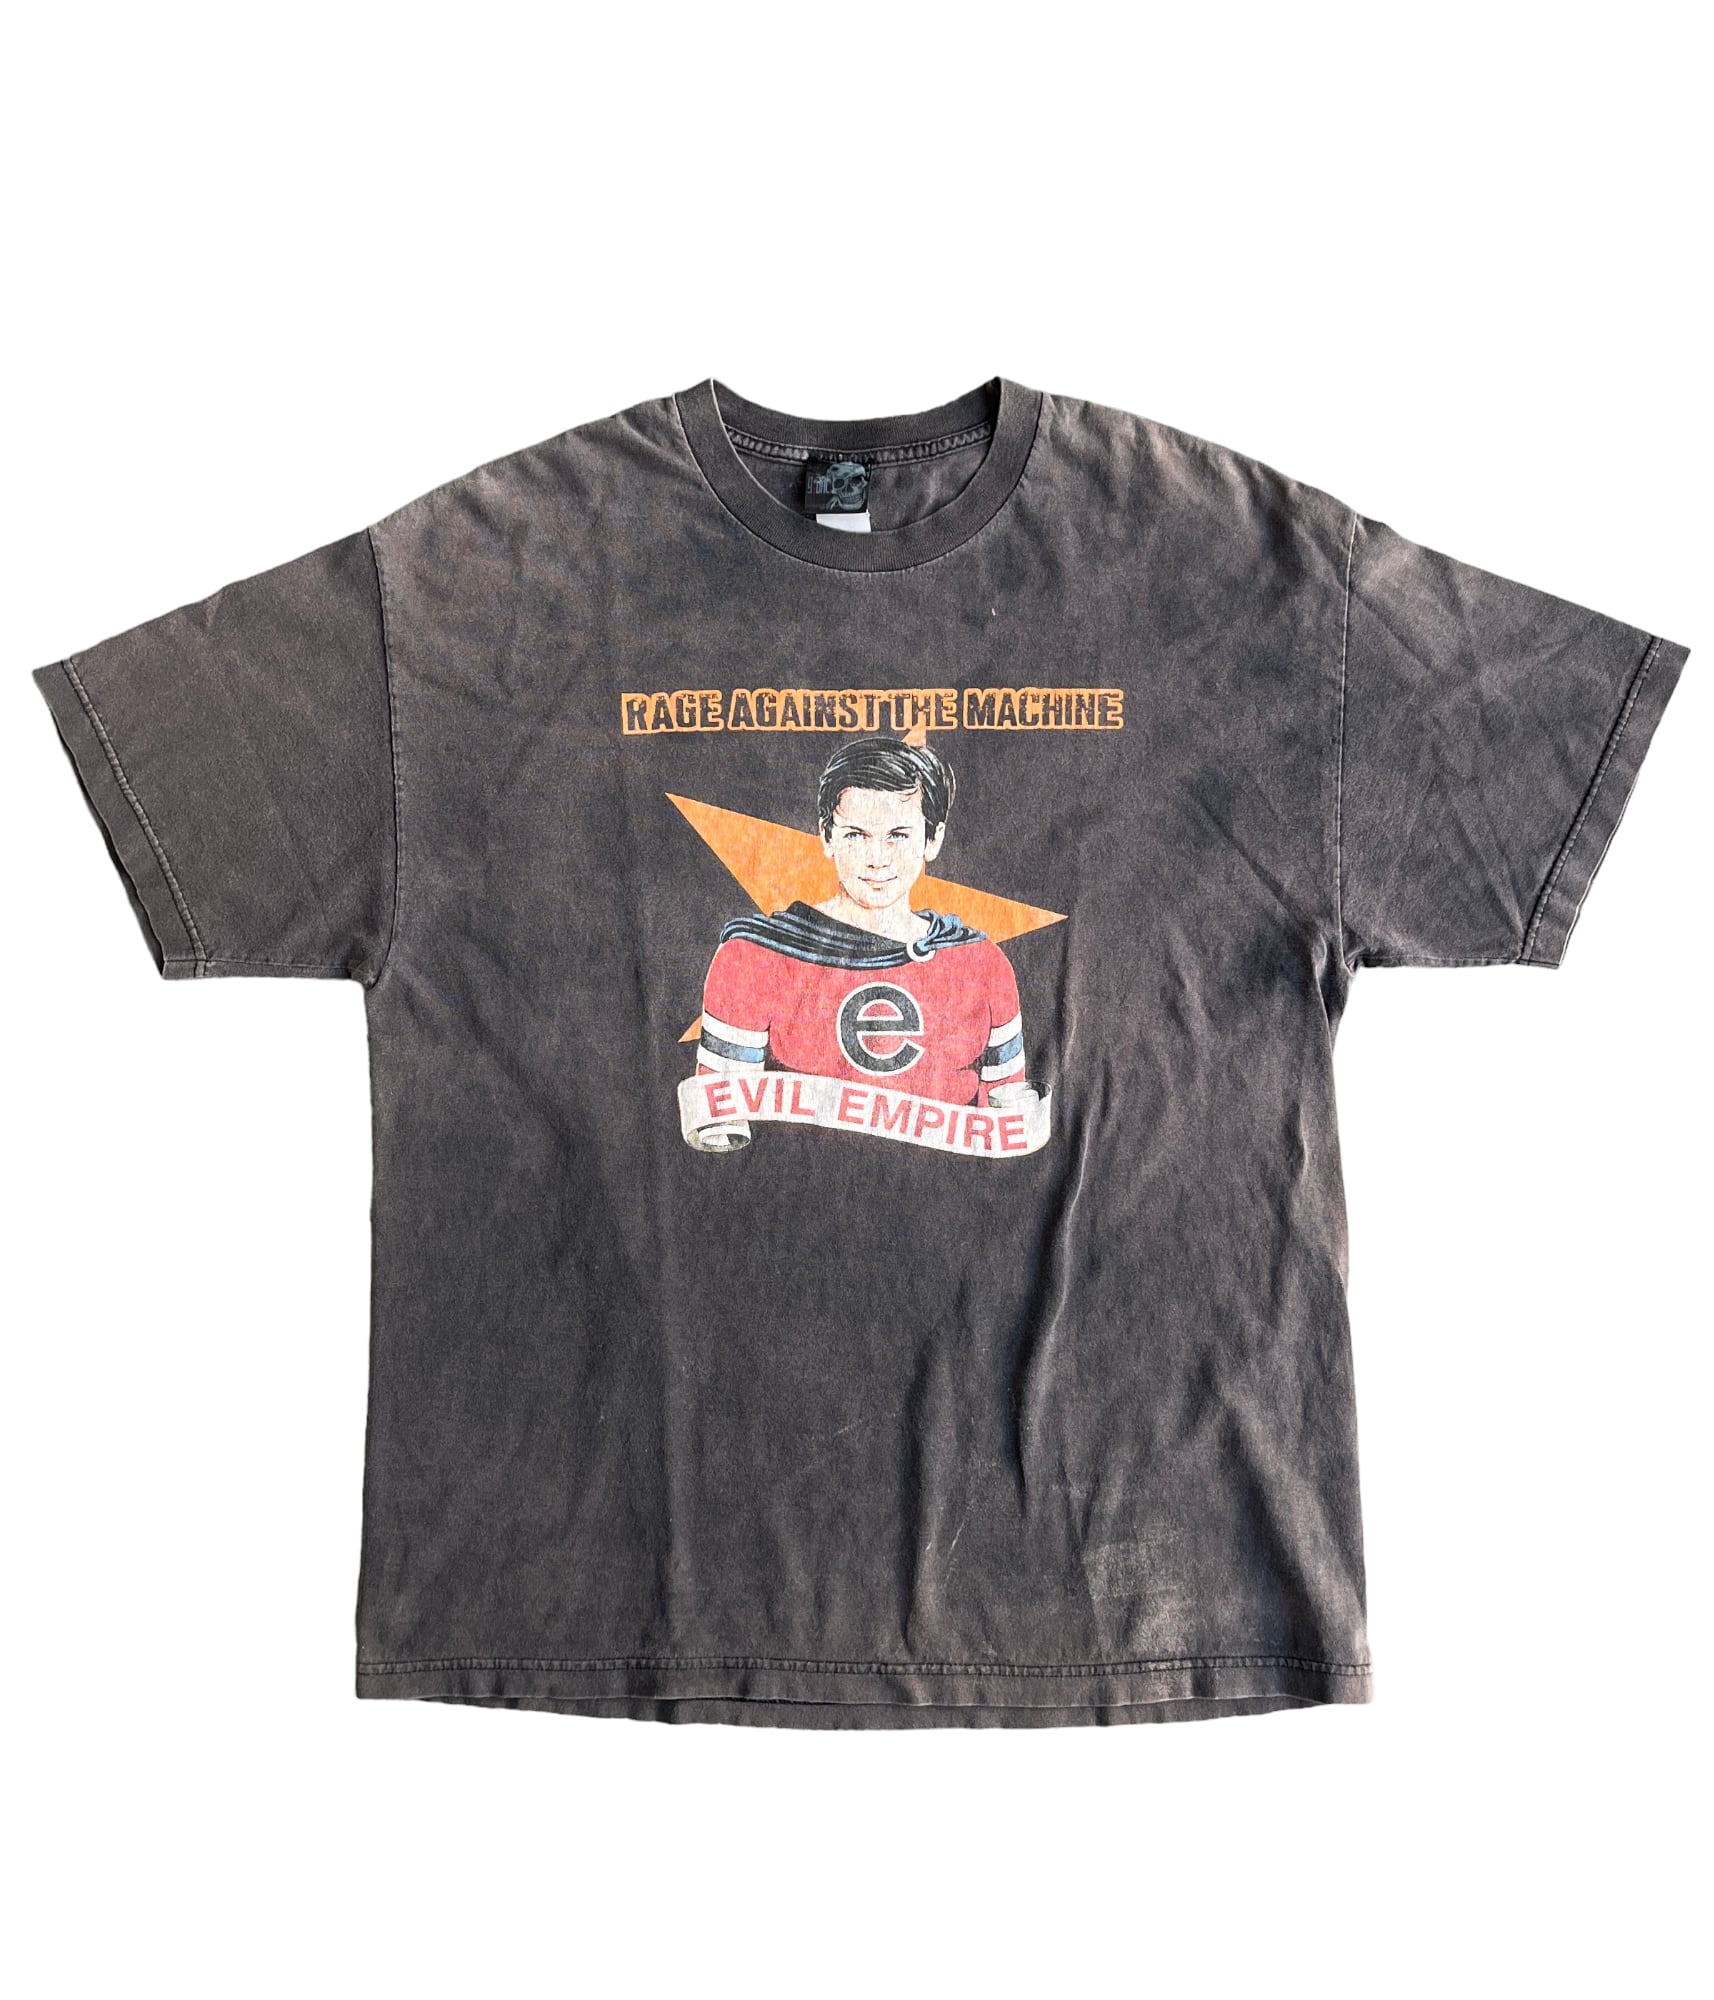 Vintage 90s Rock band T-shirt -Rage against the machine- | BEGGARS  BANQUET公式通販サイト　古着・ヴィンテージ